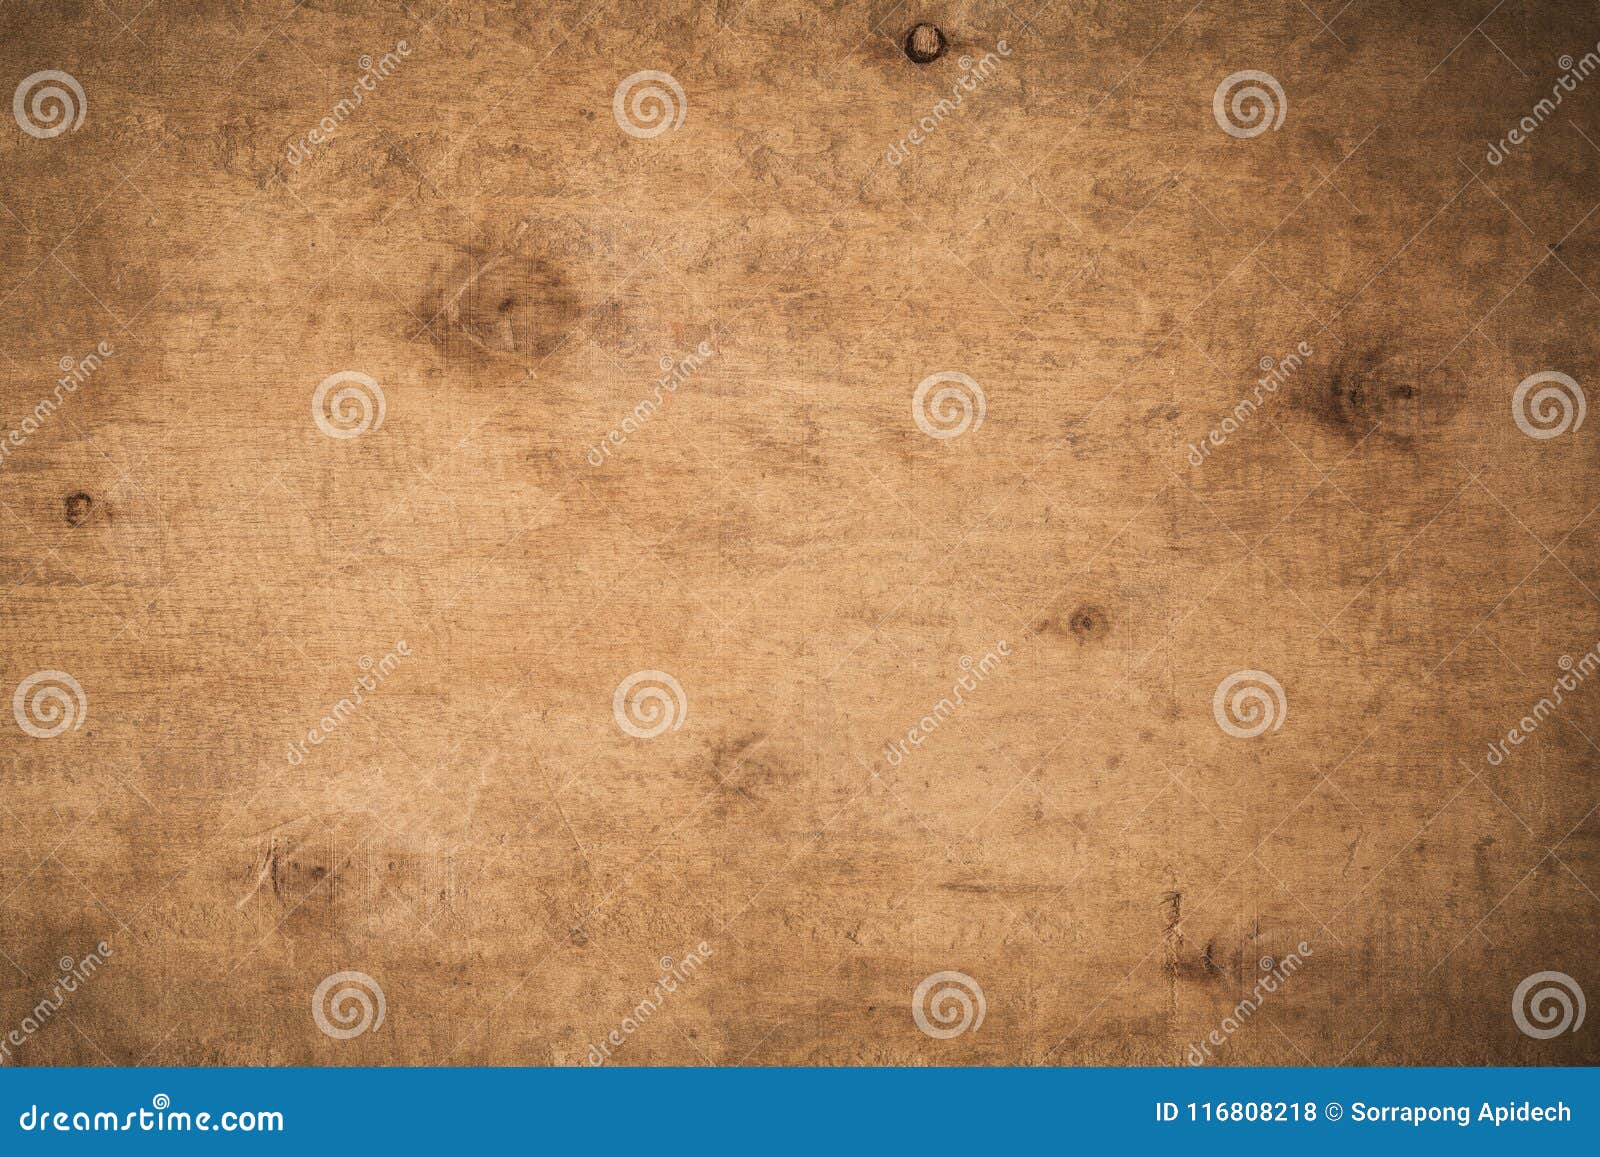 old grunge dark textured wooden background,the surface of the old brown wood texture